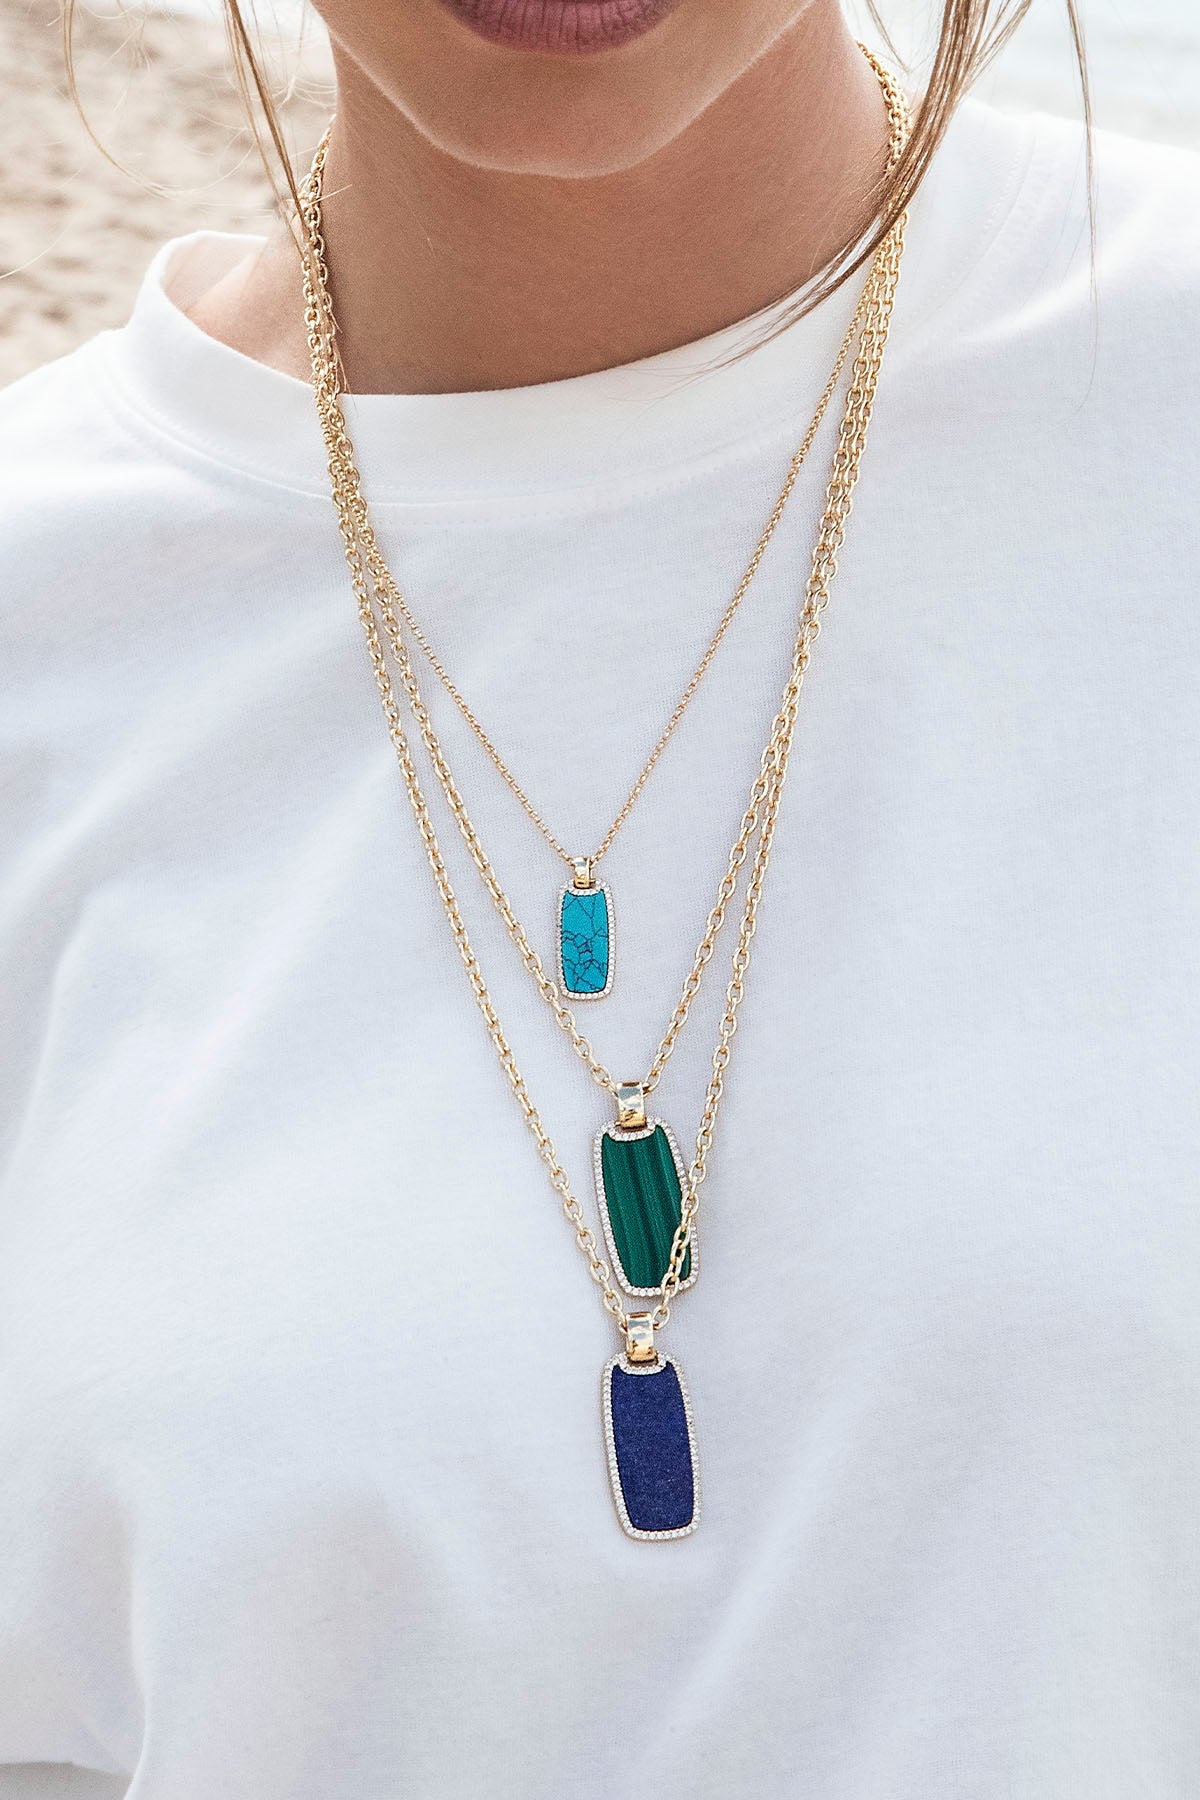 APM Monaco Lapis Lazuli Medal Chain Necklace in Yellow Gold